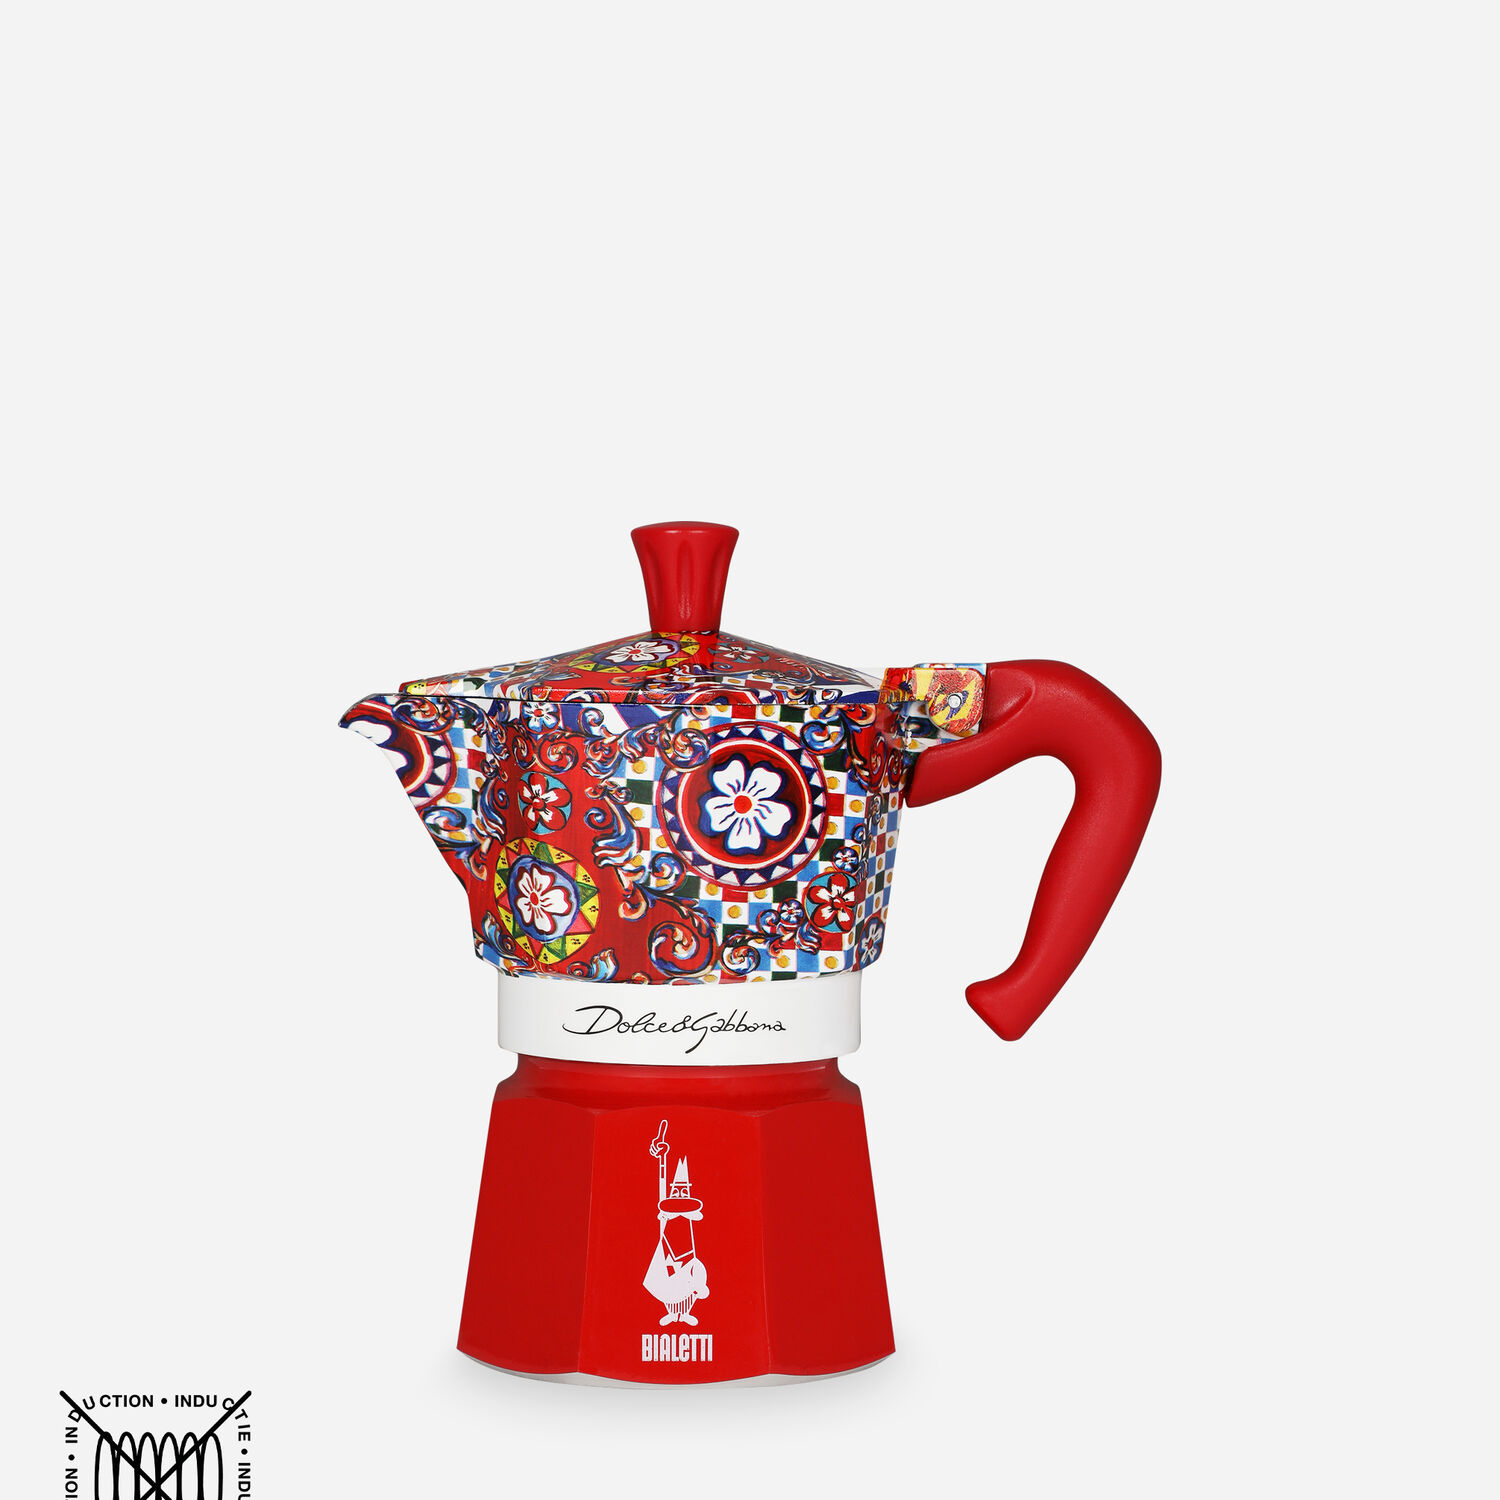 Personalised Coffee Maker Personalised Moka Pot Coffee Maker for